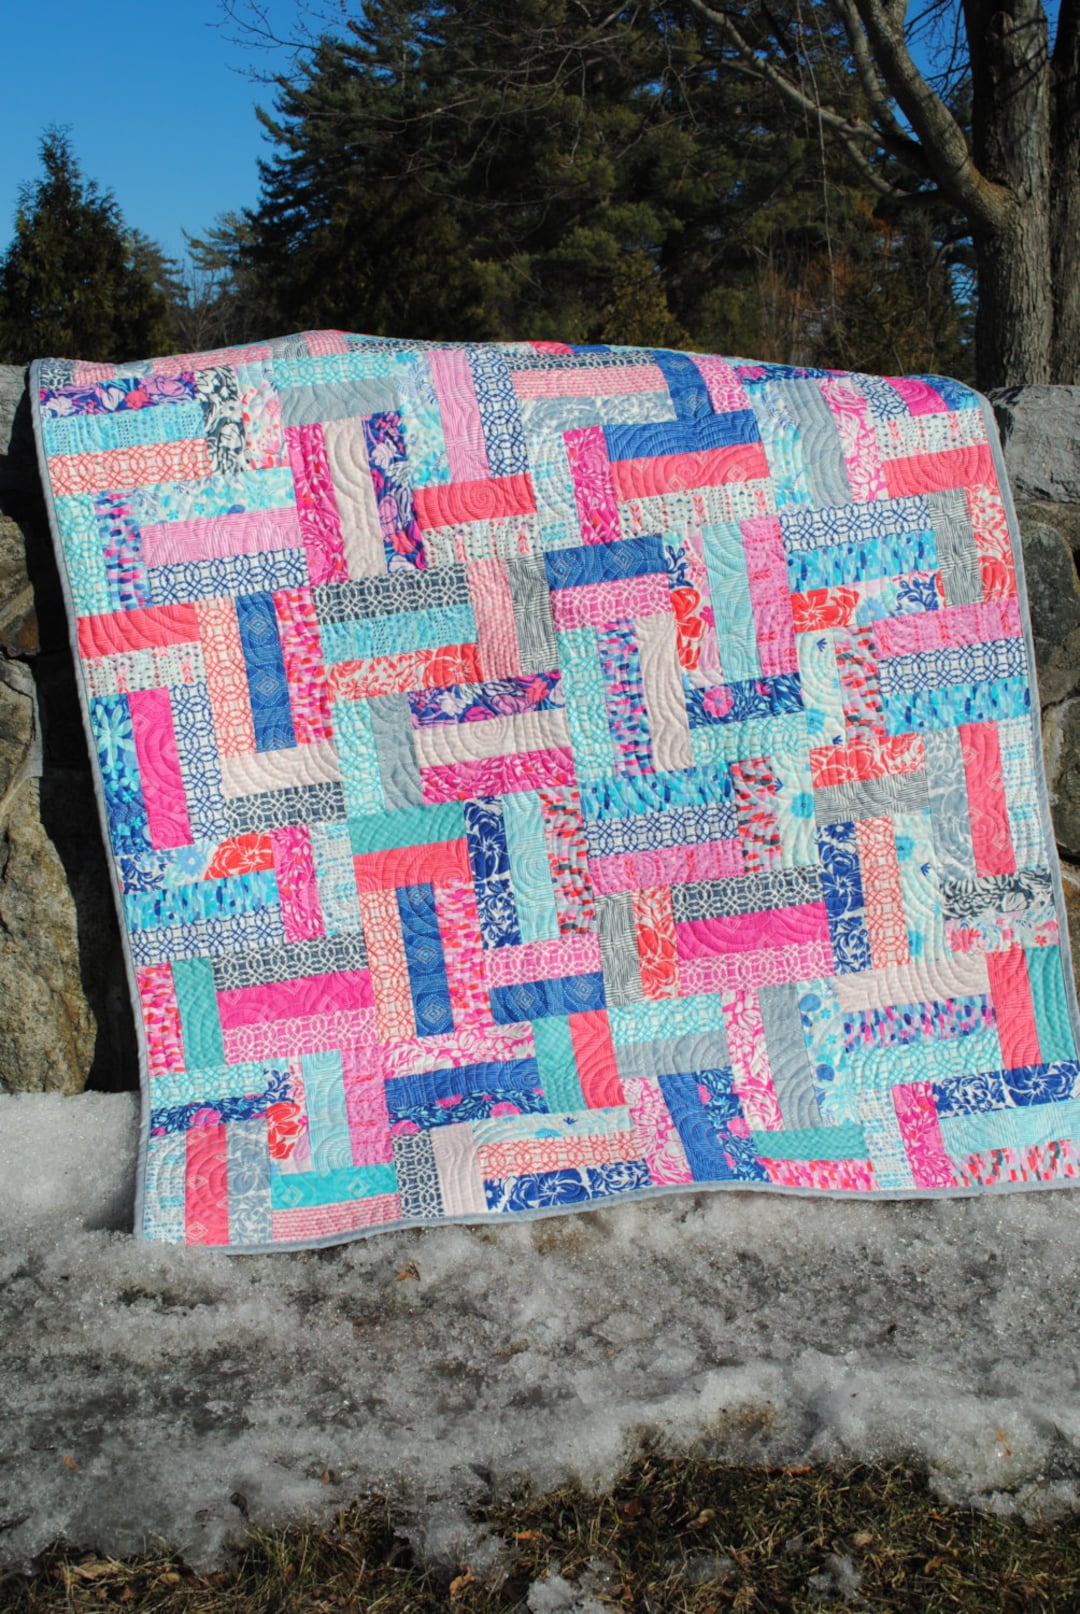 The Quilting Squares Quilt Shop - We finished our Night Beginner